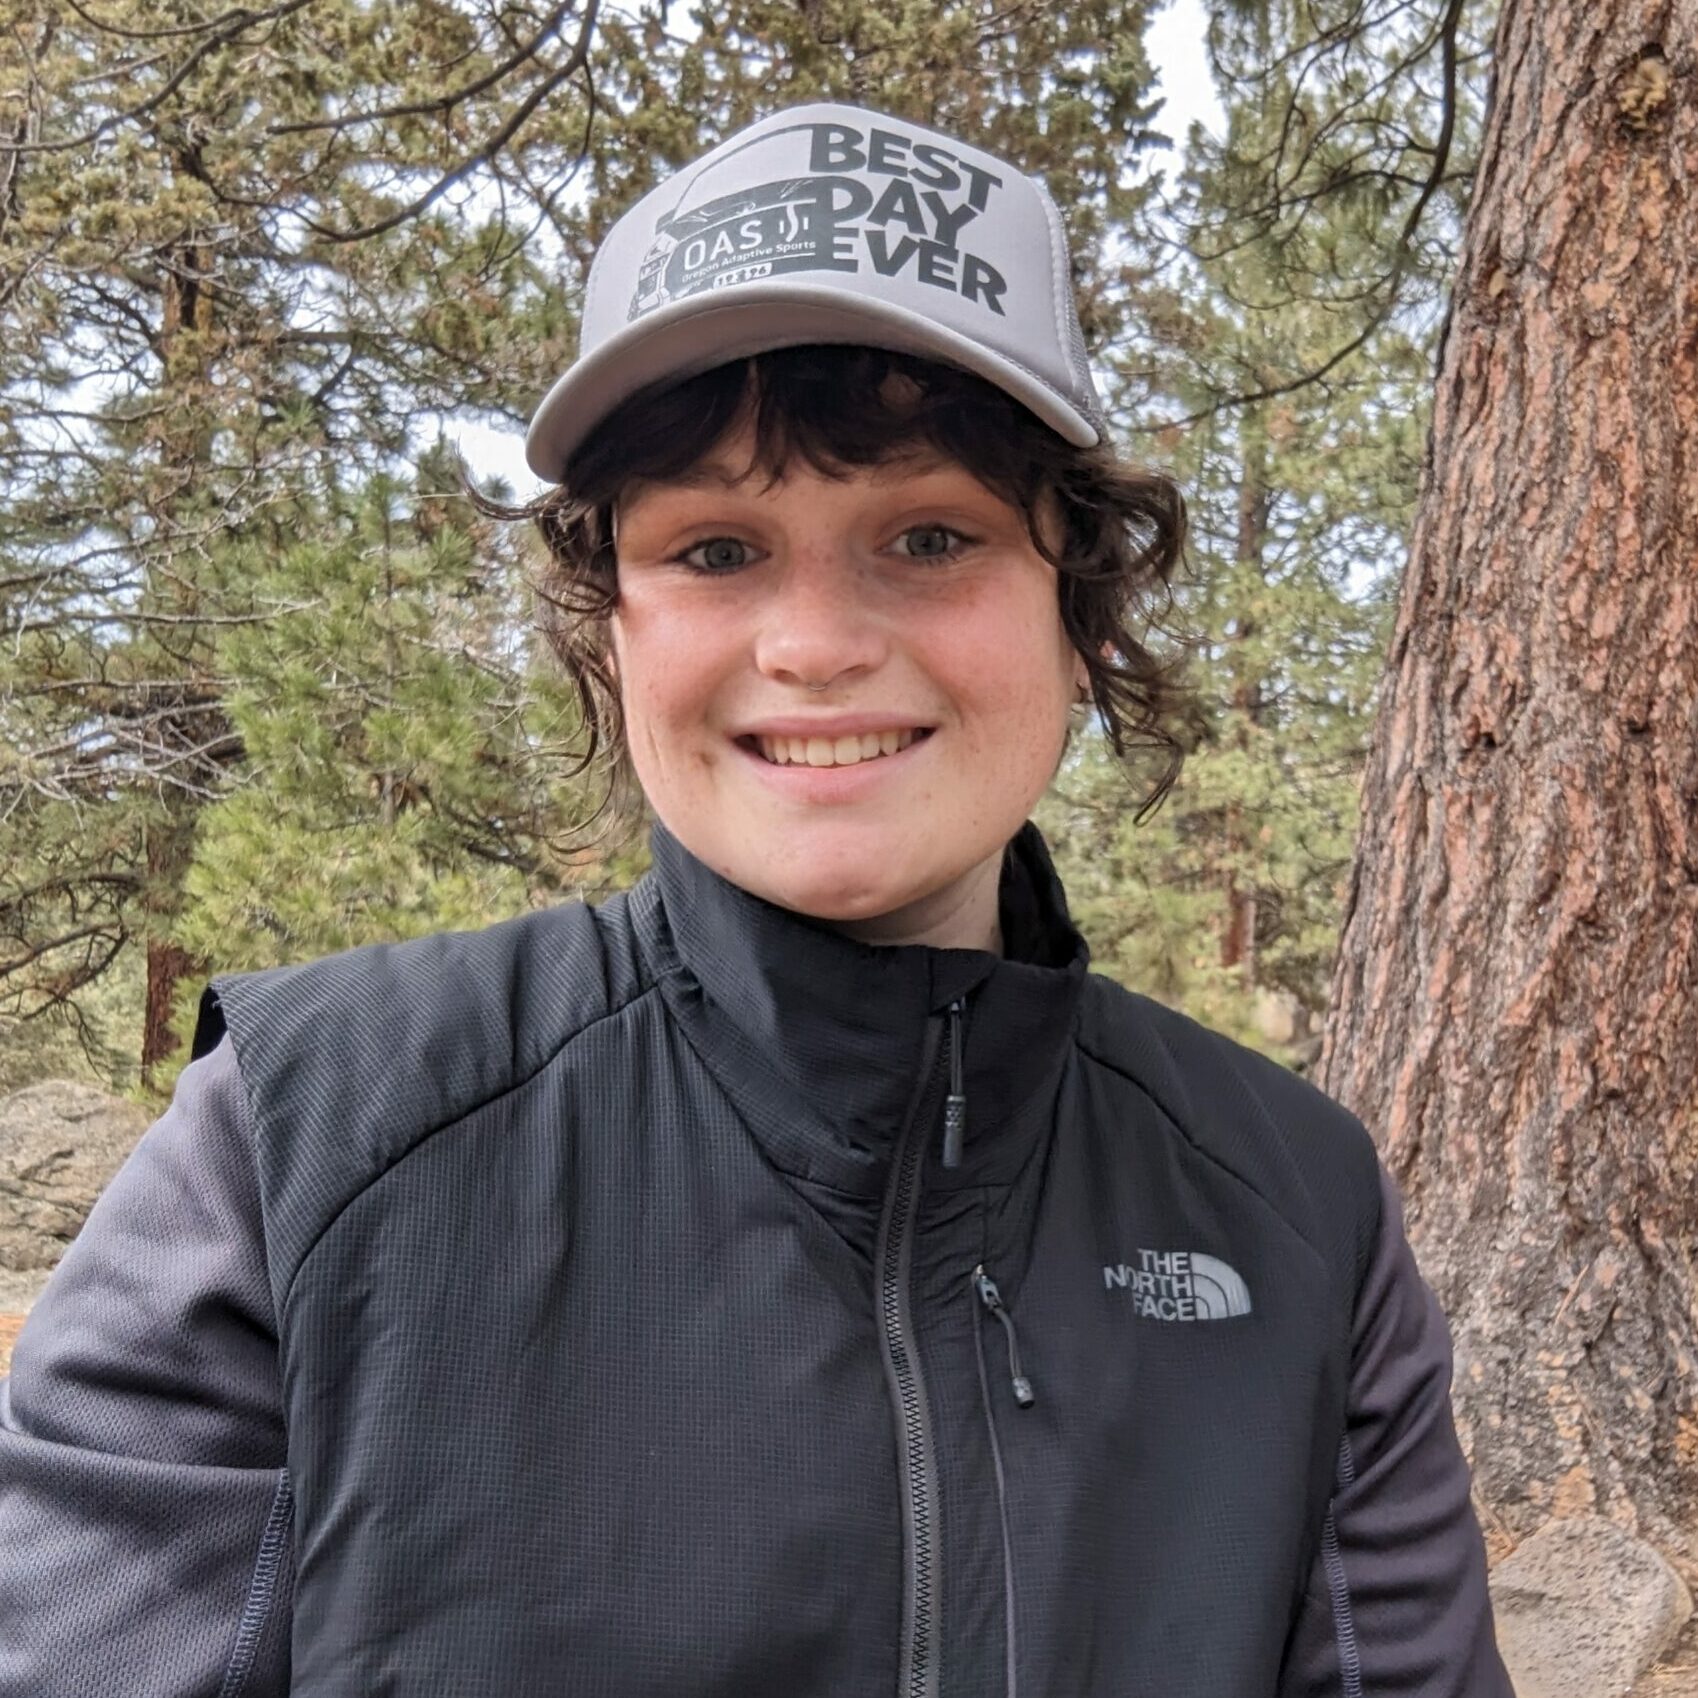 Samy wearing a grey hat, brown hair in a ponytail with pine trees in the background.